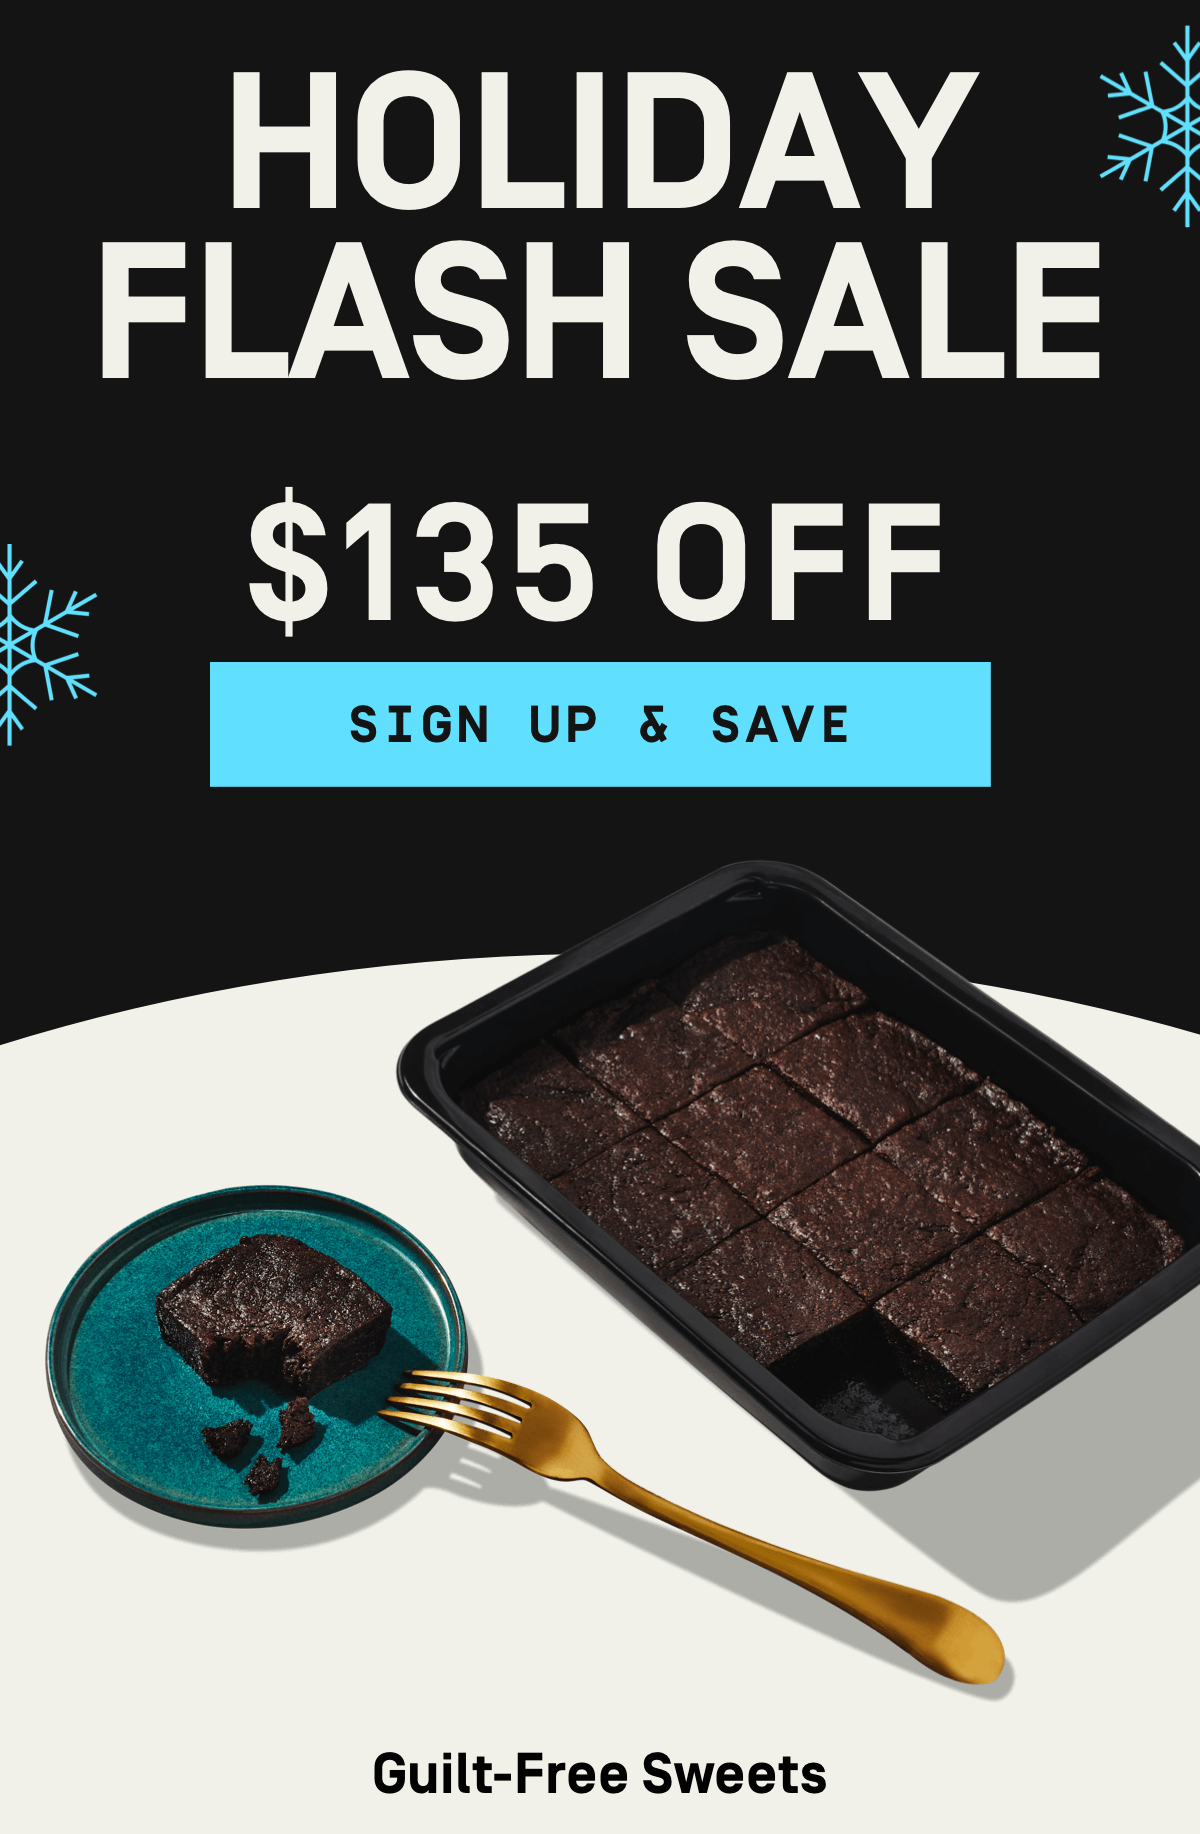 Holiday Flash Sale - Get $135 OFF | Sign Up & Save